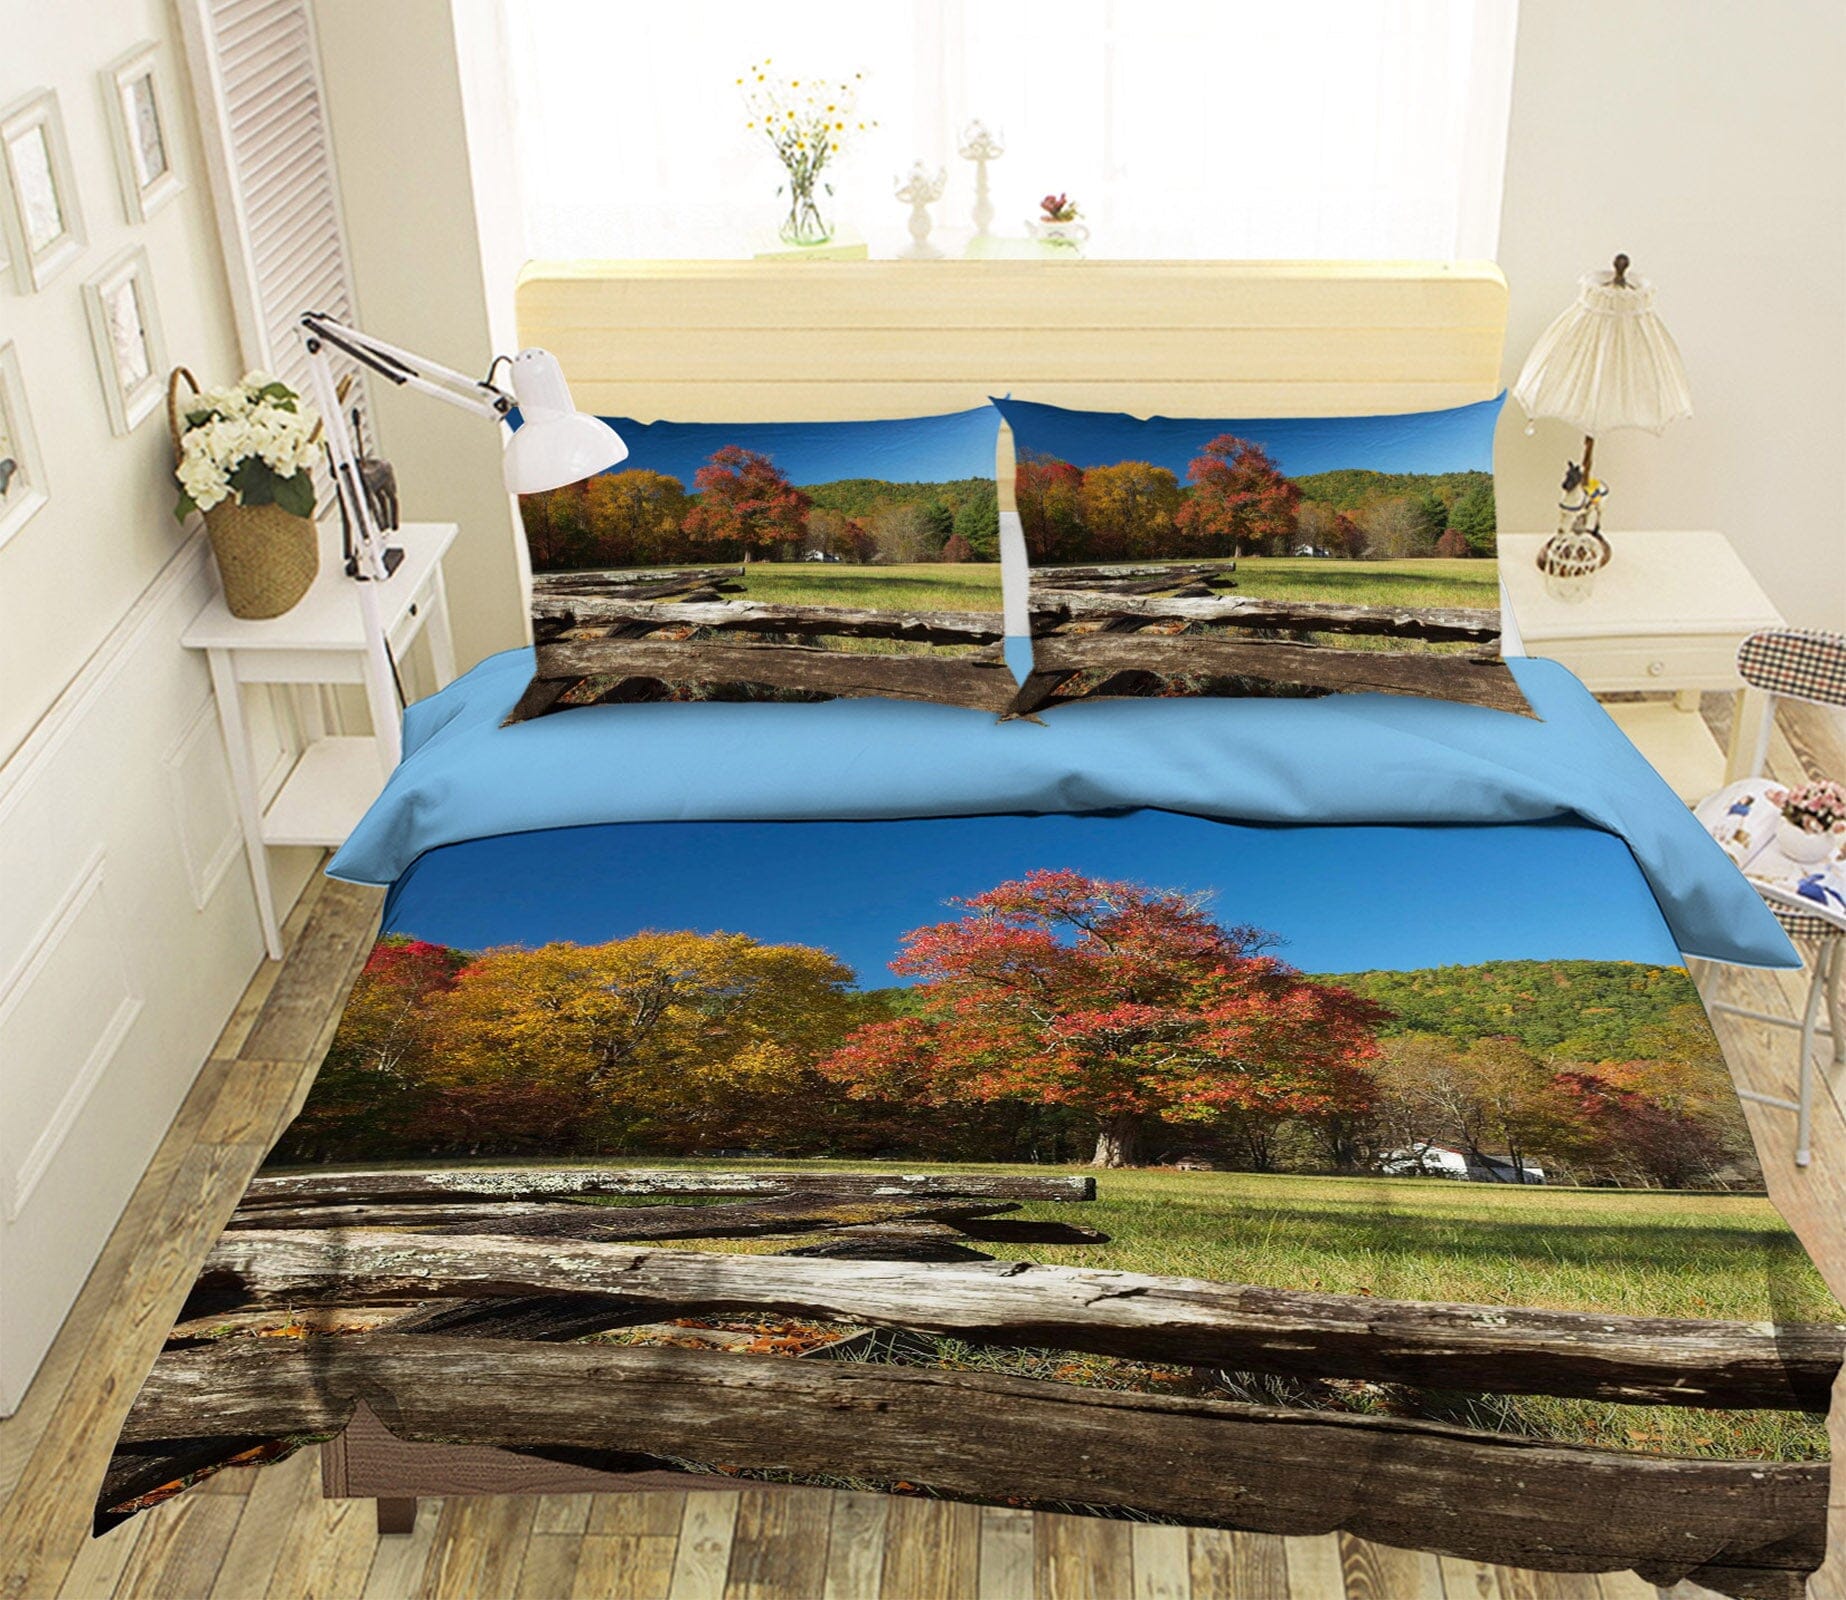 3D Natural Park 2128 Kathy Barefield Bedding Bed Pillowcases Quilt Quiet Covers AJ Creativity Home 